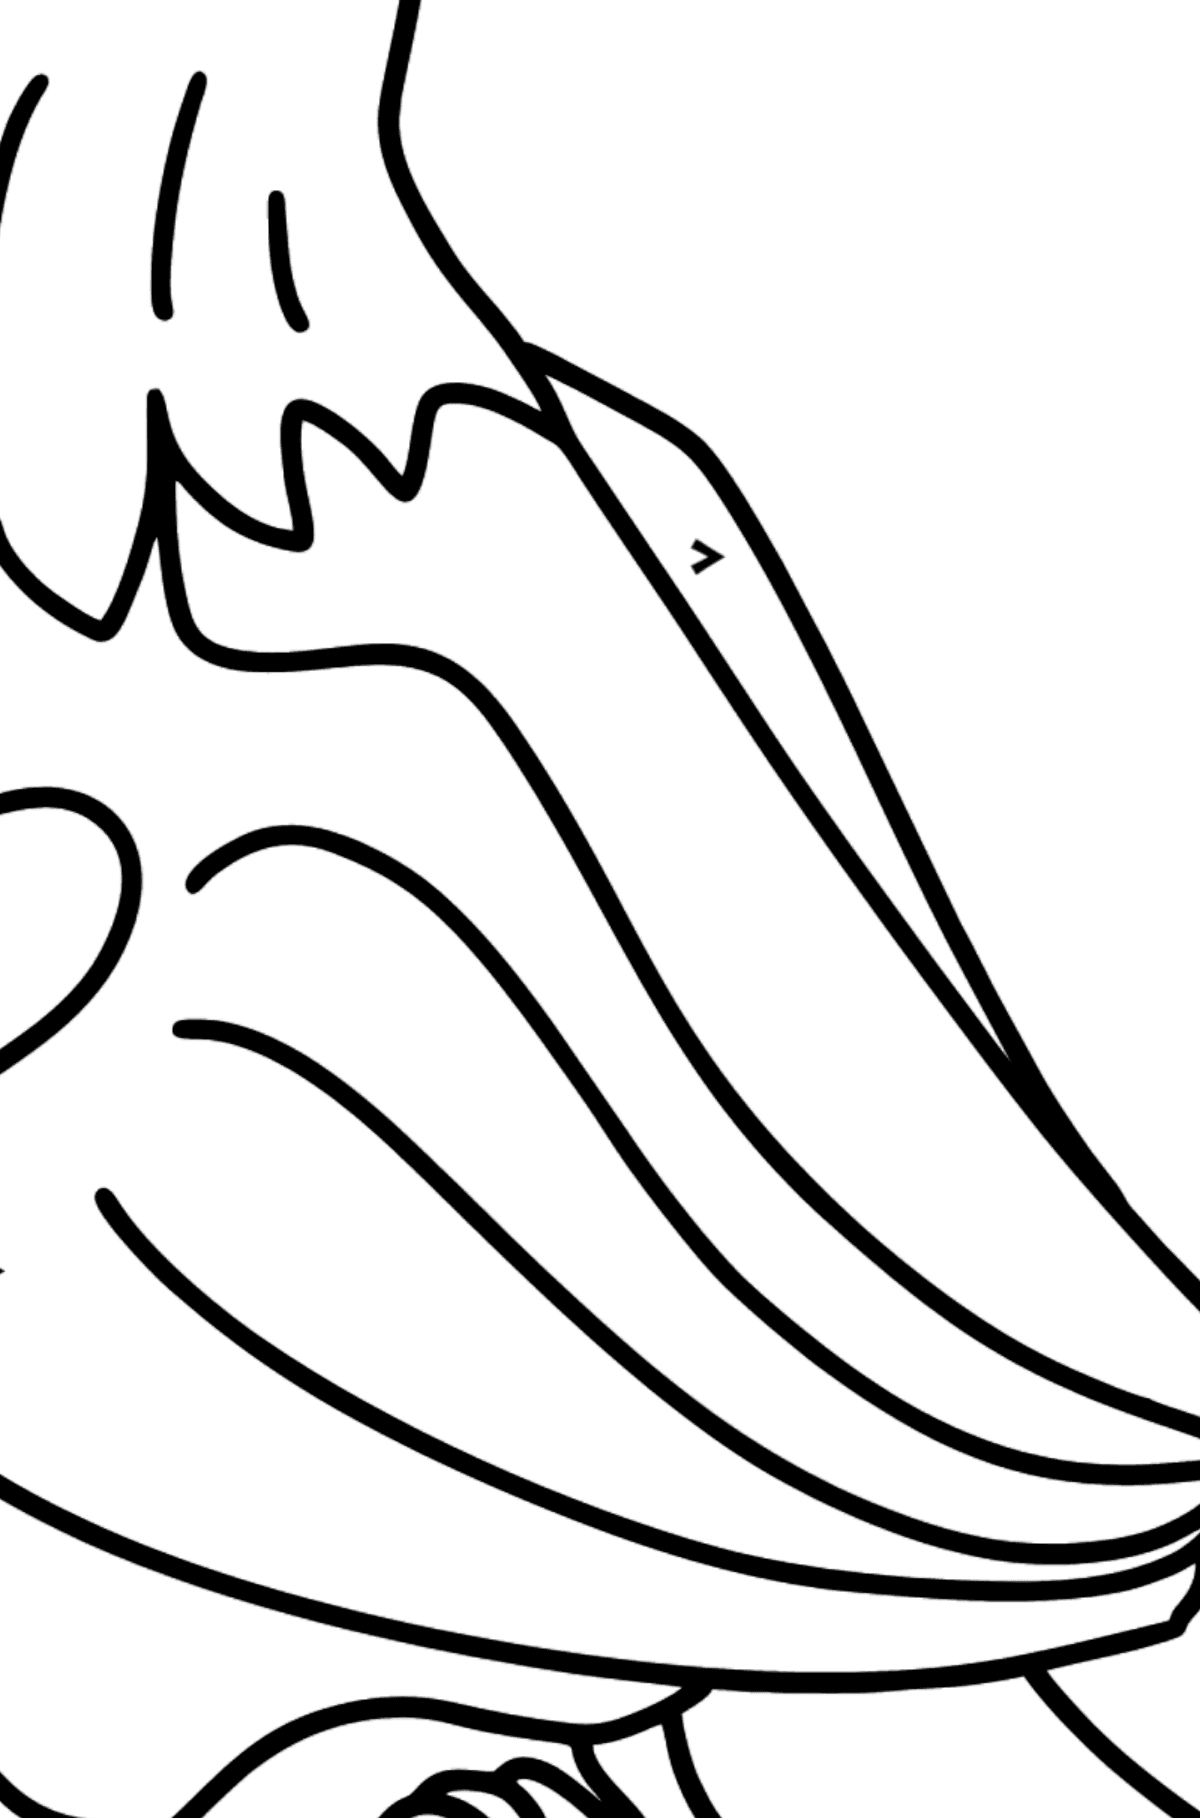 Hawk coloring page - Coloring by Symbols for Kids